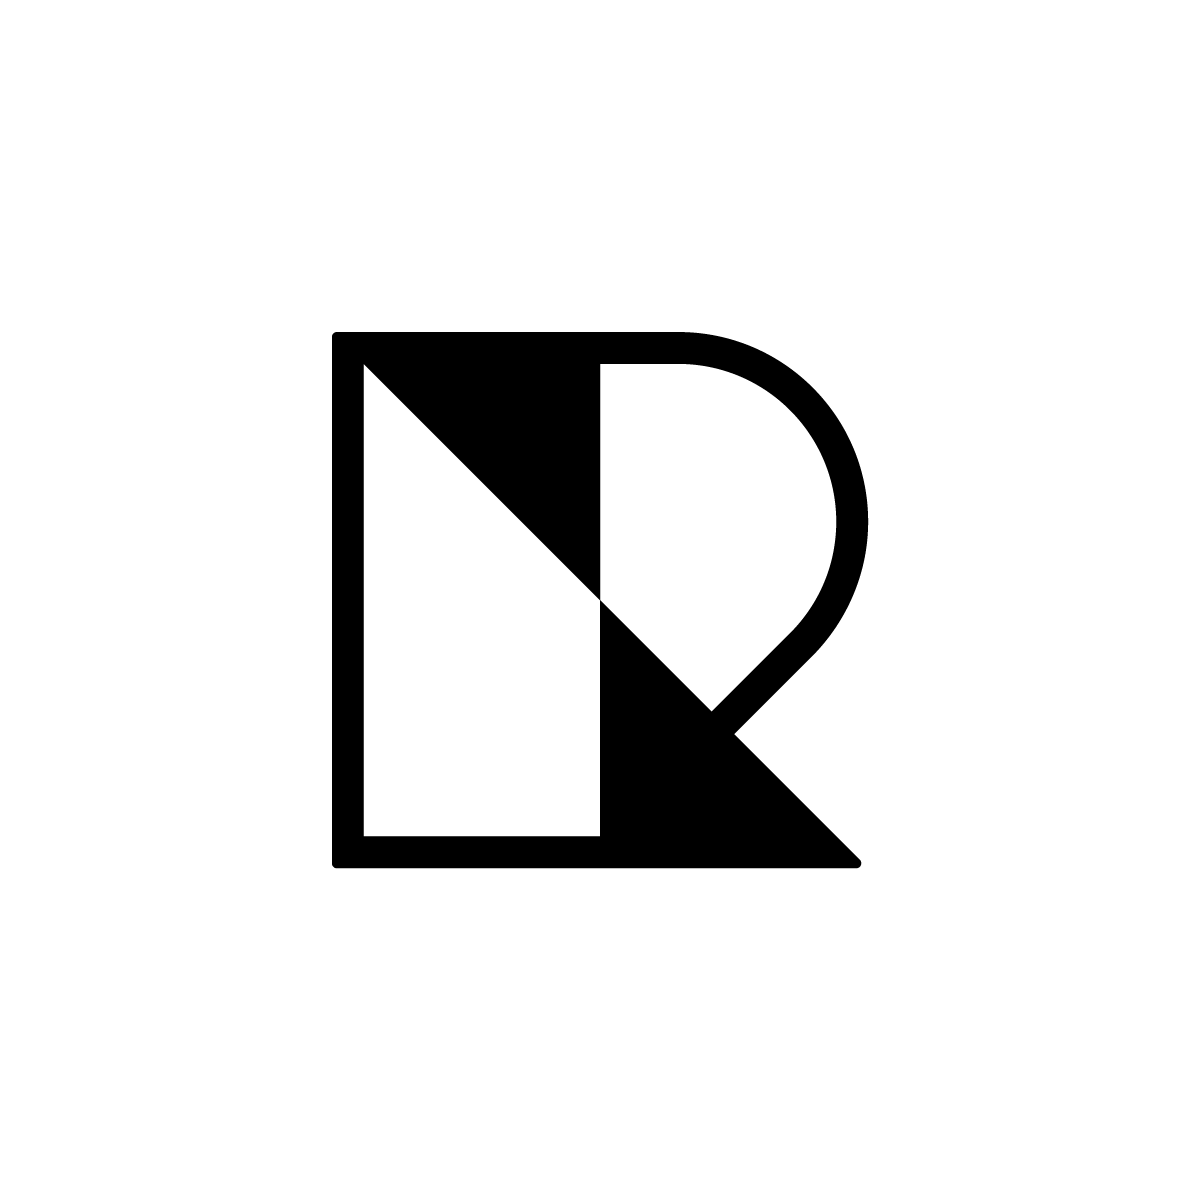 R Arrows Logo with arrows in 'R,' symbolizes sustainability, innovation, and renewal for eco-conscious brands.